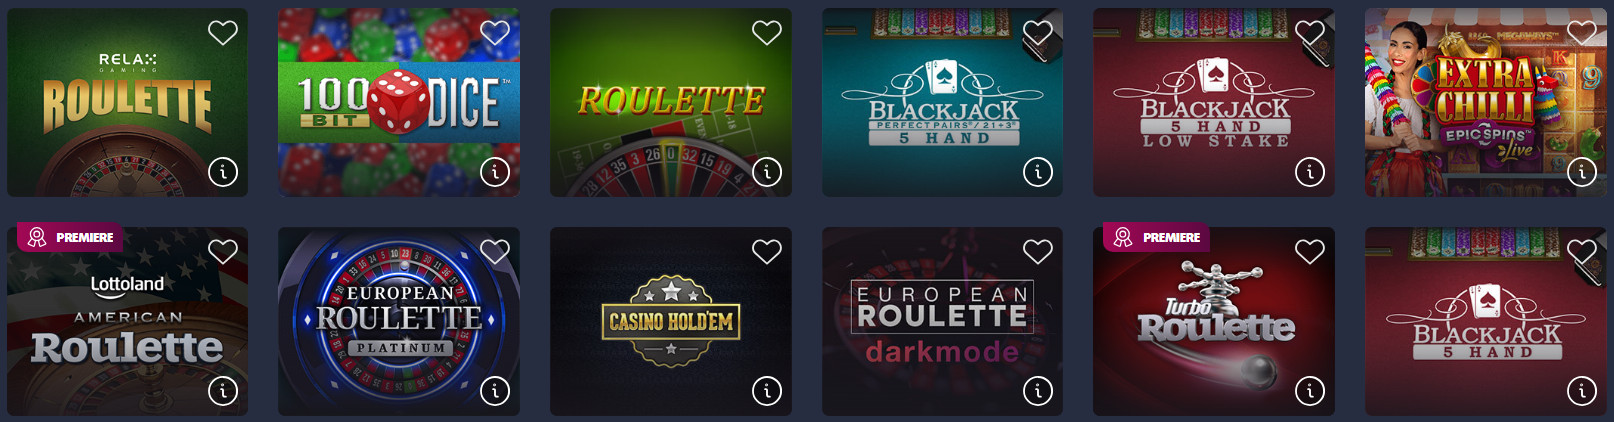 Table Games Section at Lottoland Casino